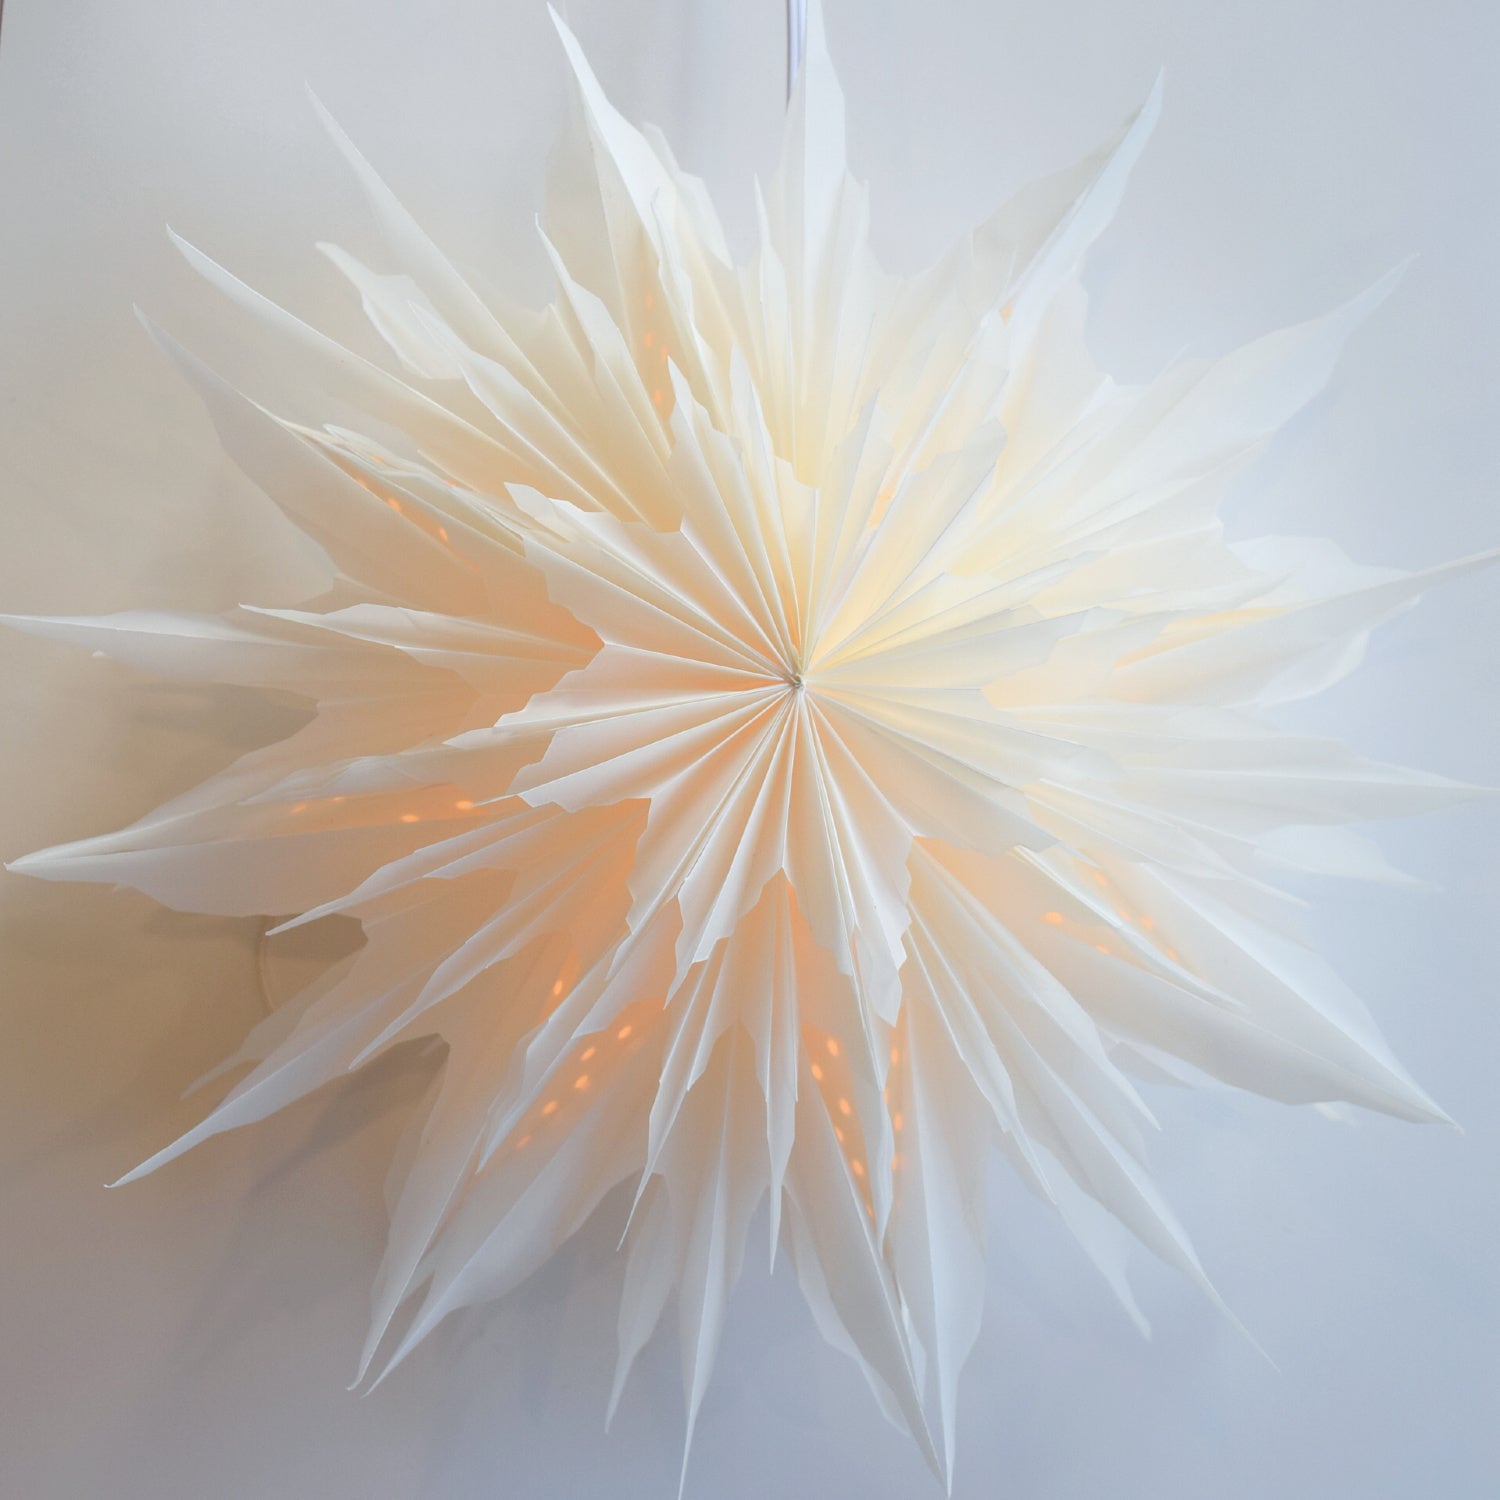 White Snowdrift Snowflake Star Lantern Pizzelle Design - Great With or Without Lights - Ideal for Holiday and Snowflake Decorations, Weddings, Parties, and Home Decor